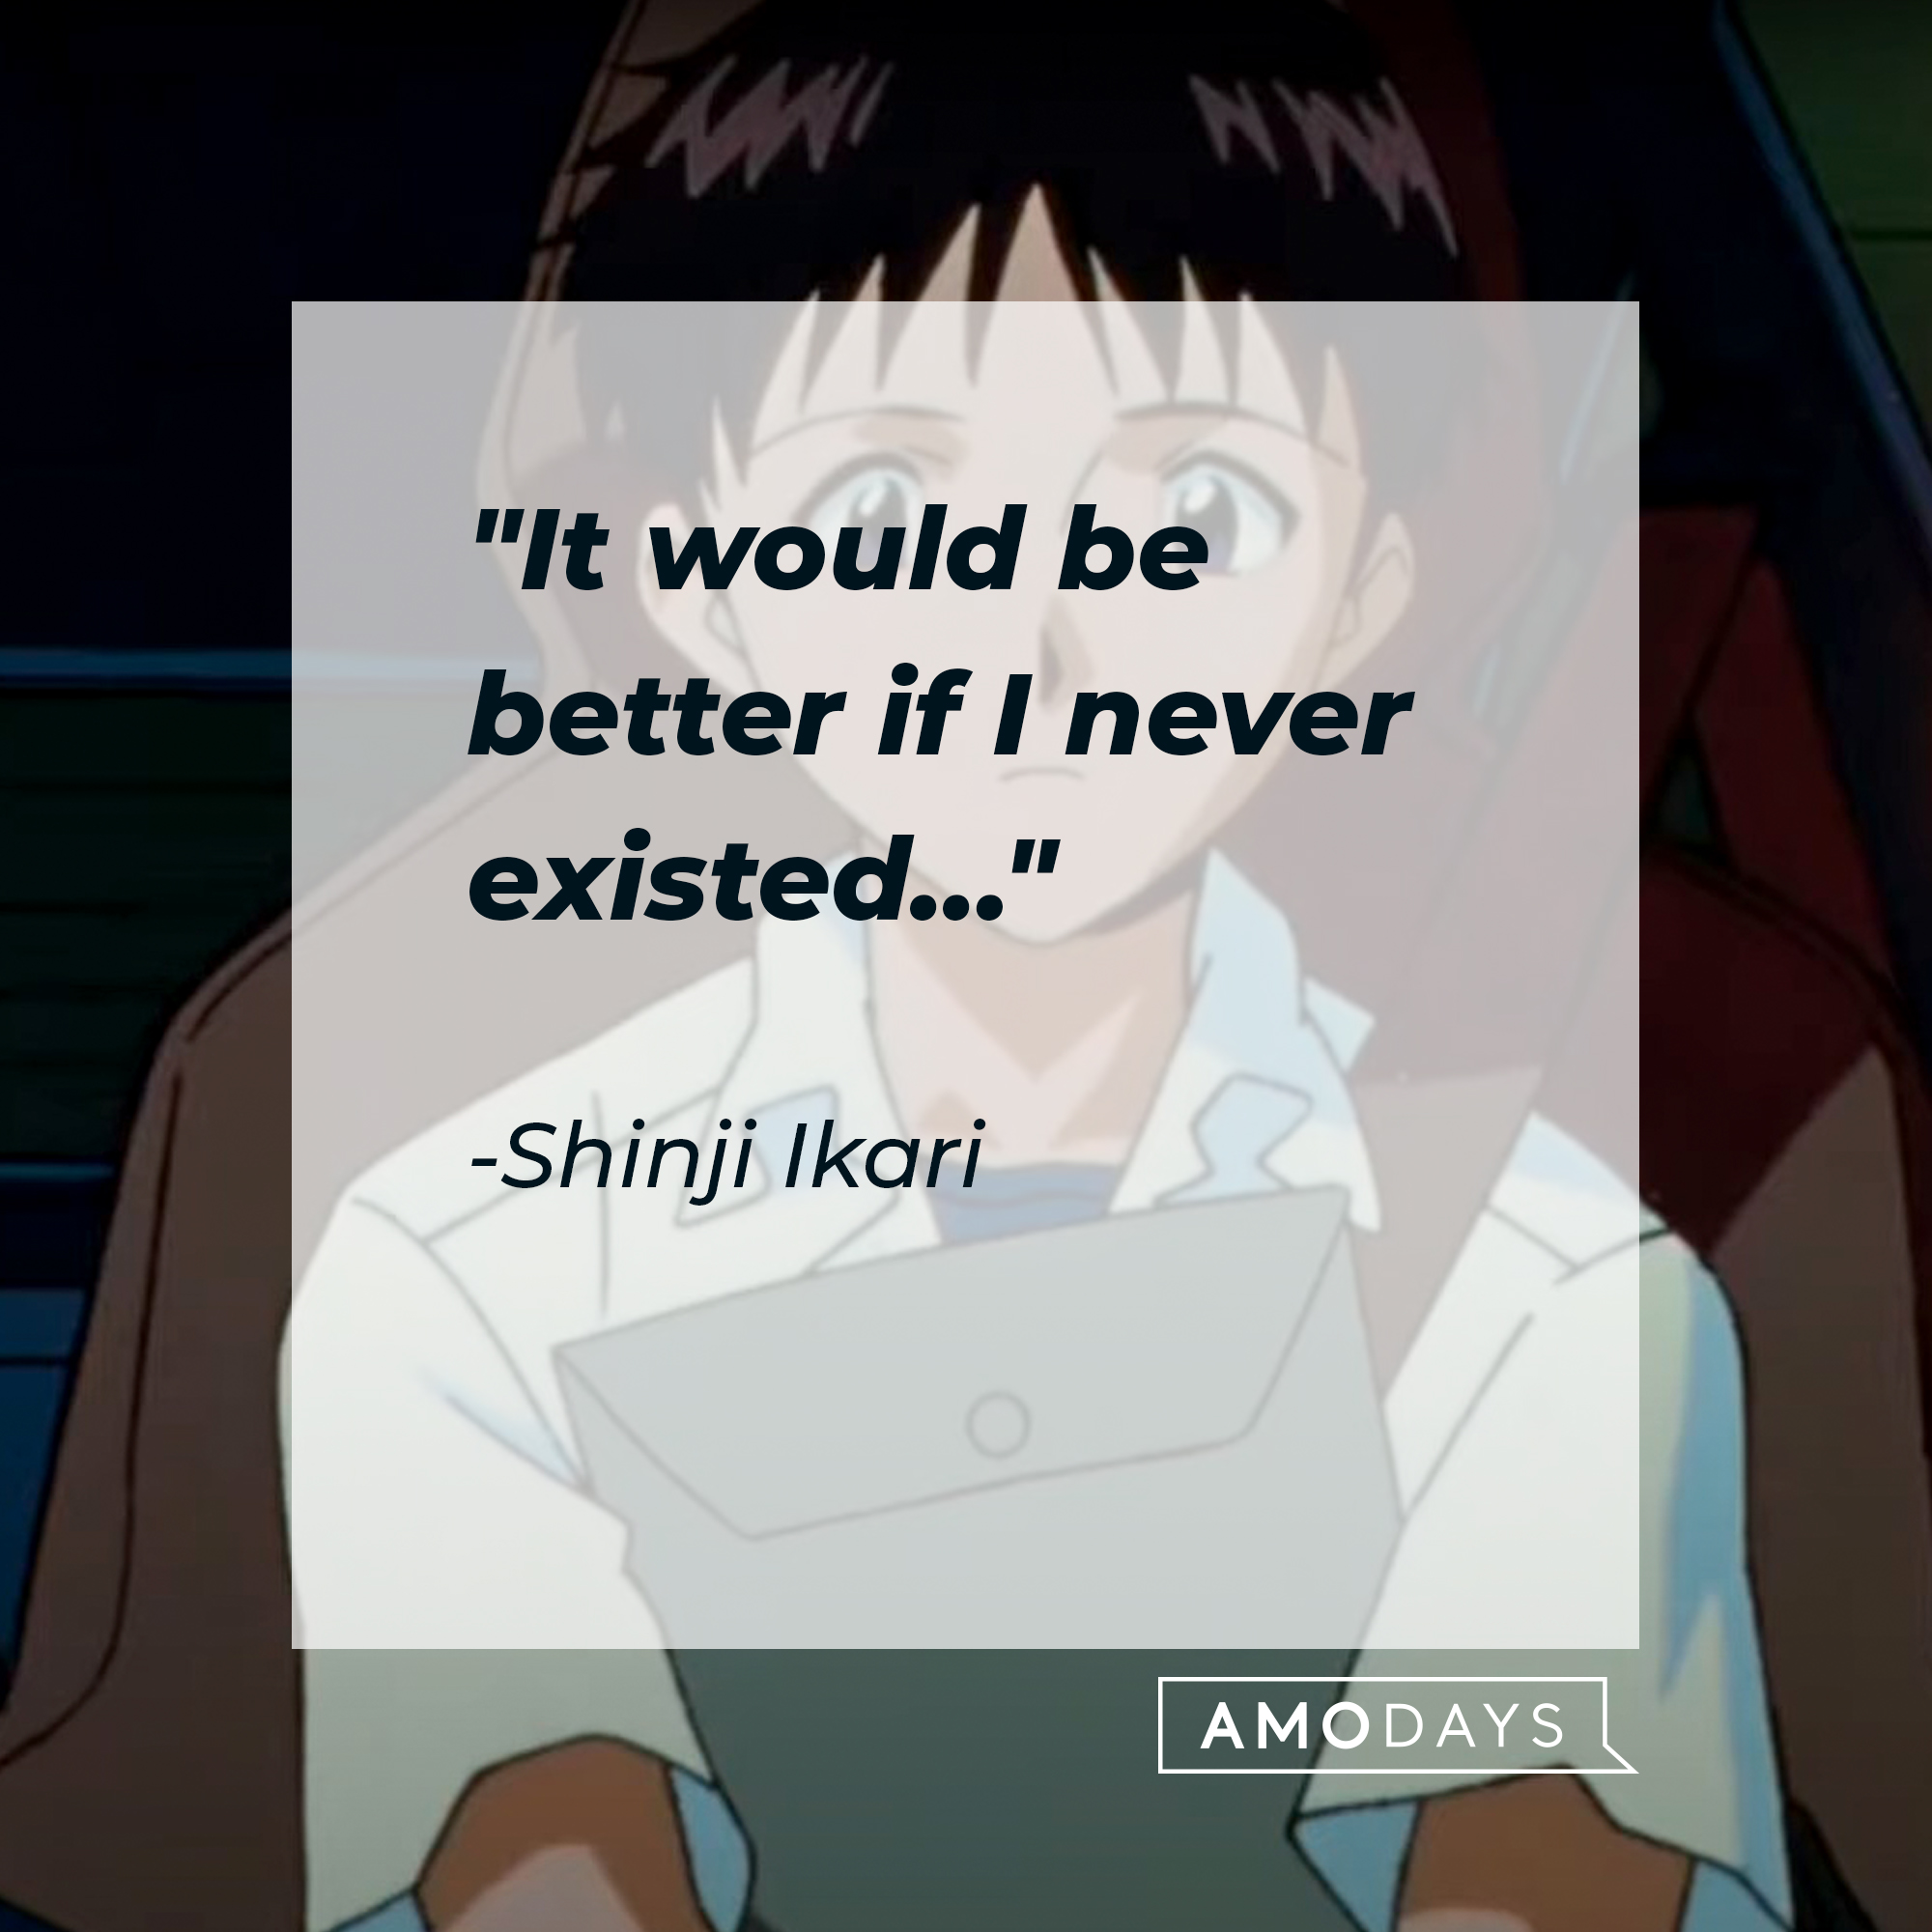 Shinji Ikari's quote: "It would be better if I never existed…" | Source: Facebook.com/EvangelionMovie